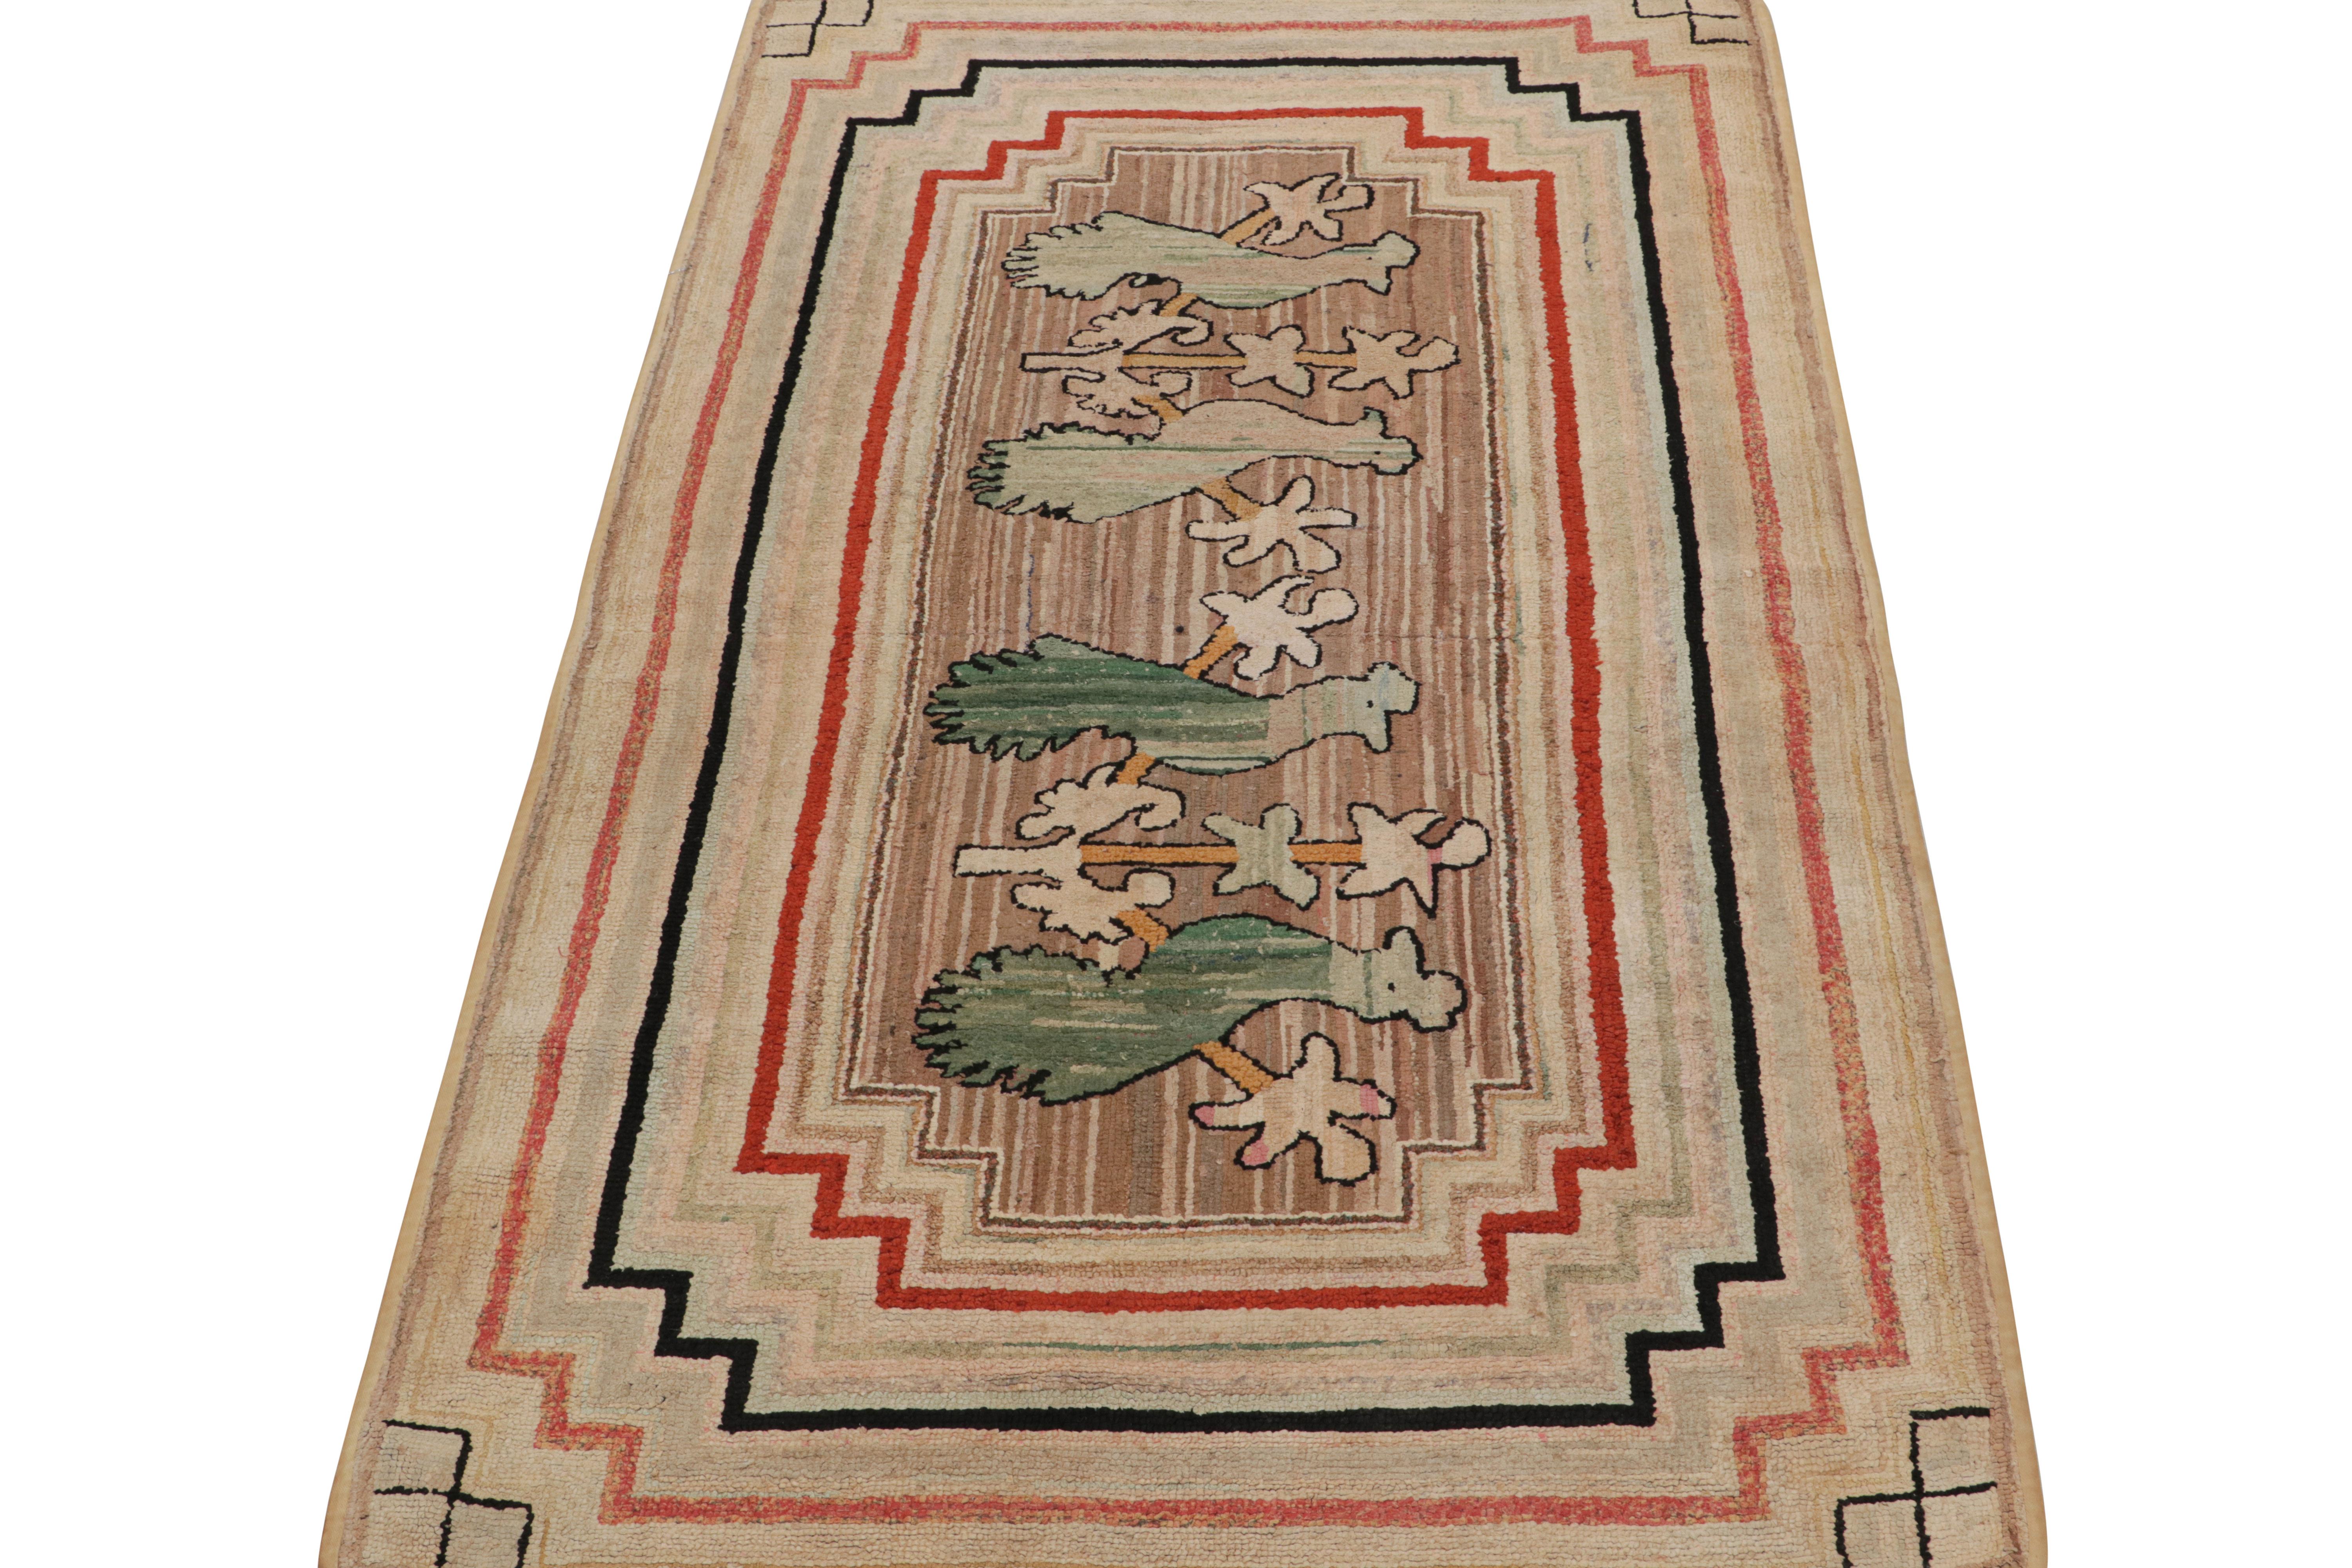 American Antique Hooked Runner Rug in Beige with Green Bird Pictorials, from Rug & Kilim